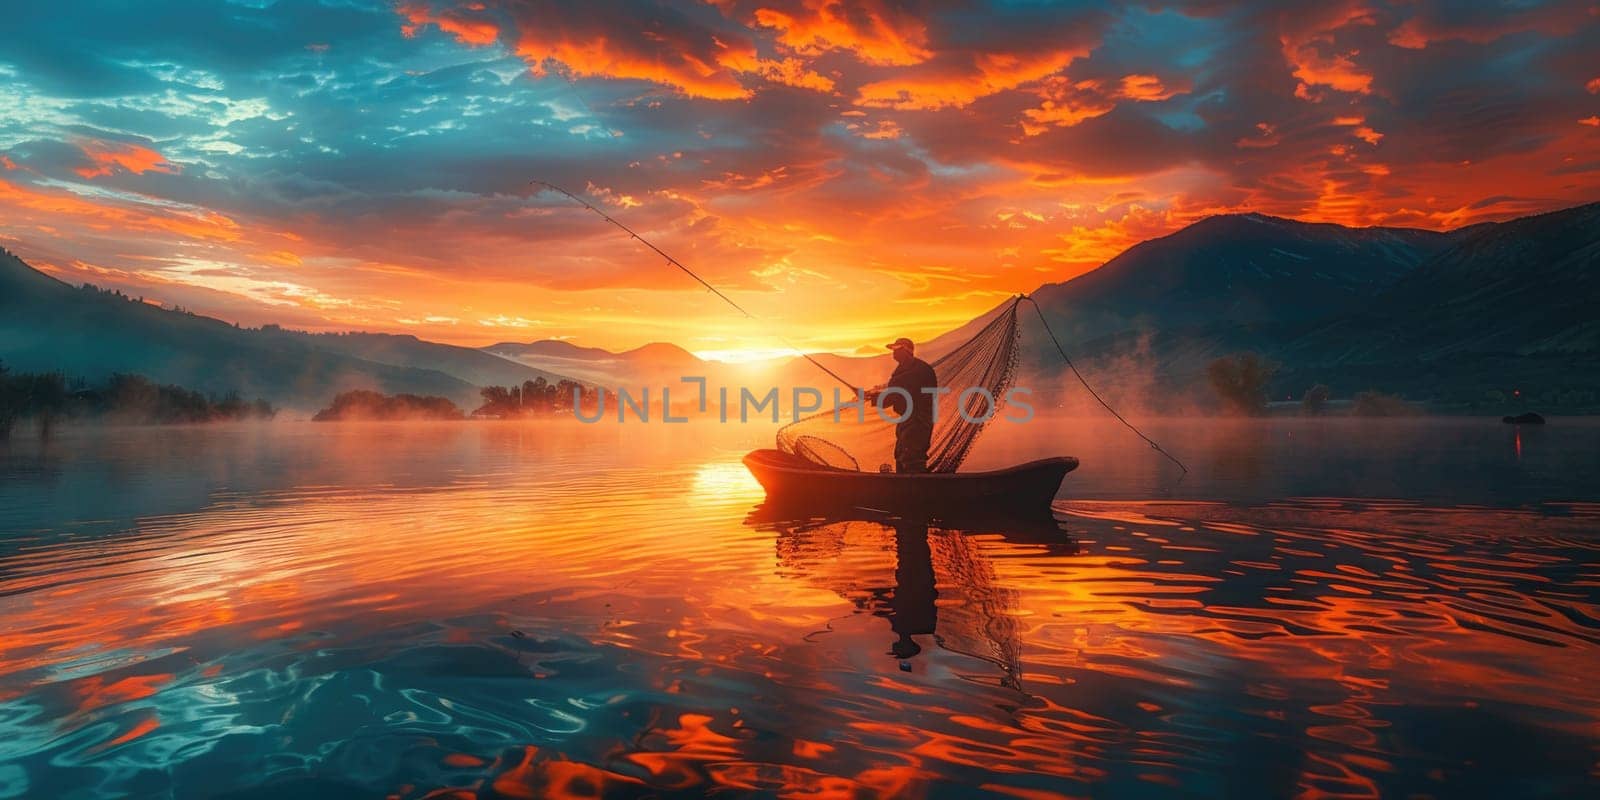 A man is fishing from a small boat on a calm lake as the sun sets in the background.